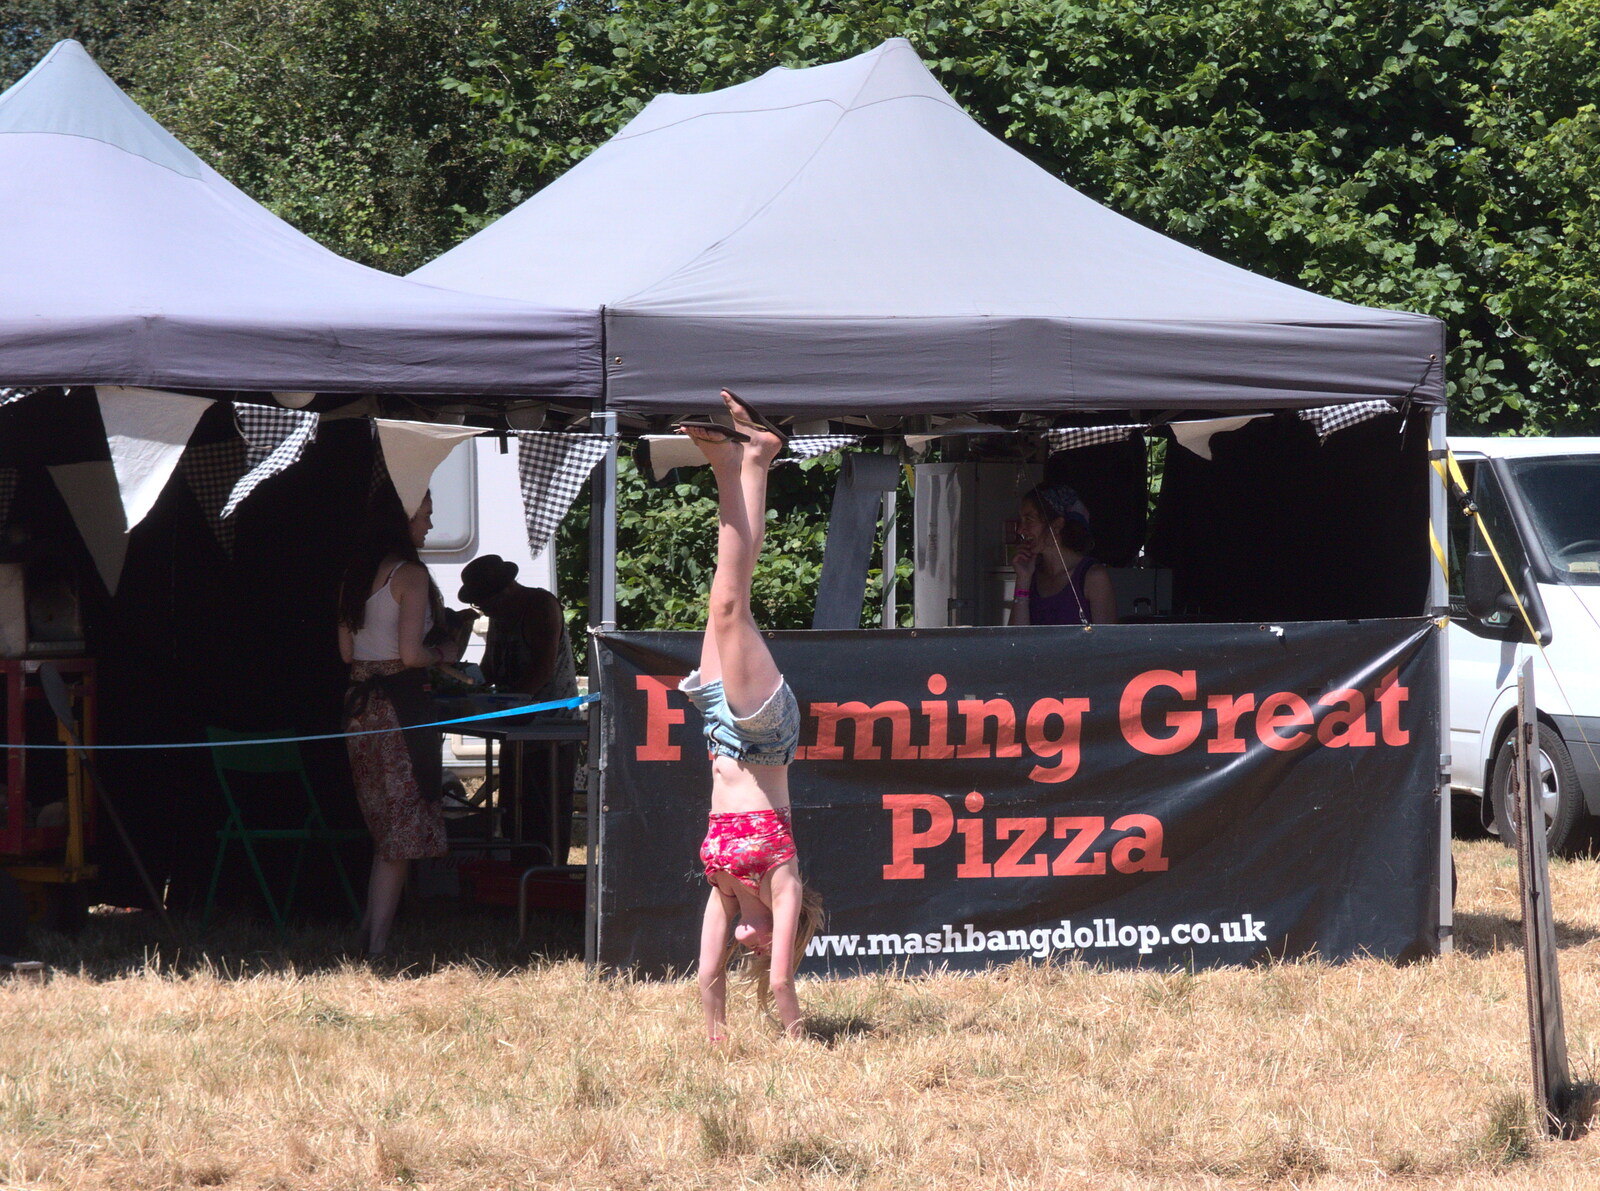 Someone's excited for pizza, so they do a handstand from WoW Festival, Burston, Norfolk - 29th June - 1st July 2018